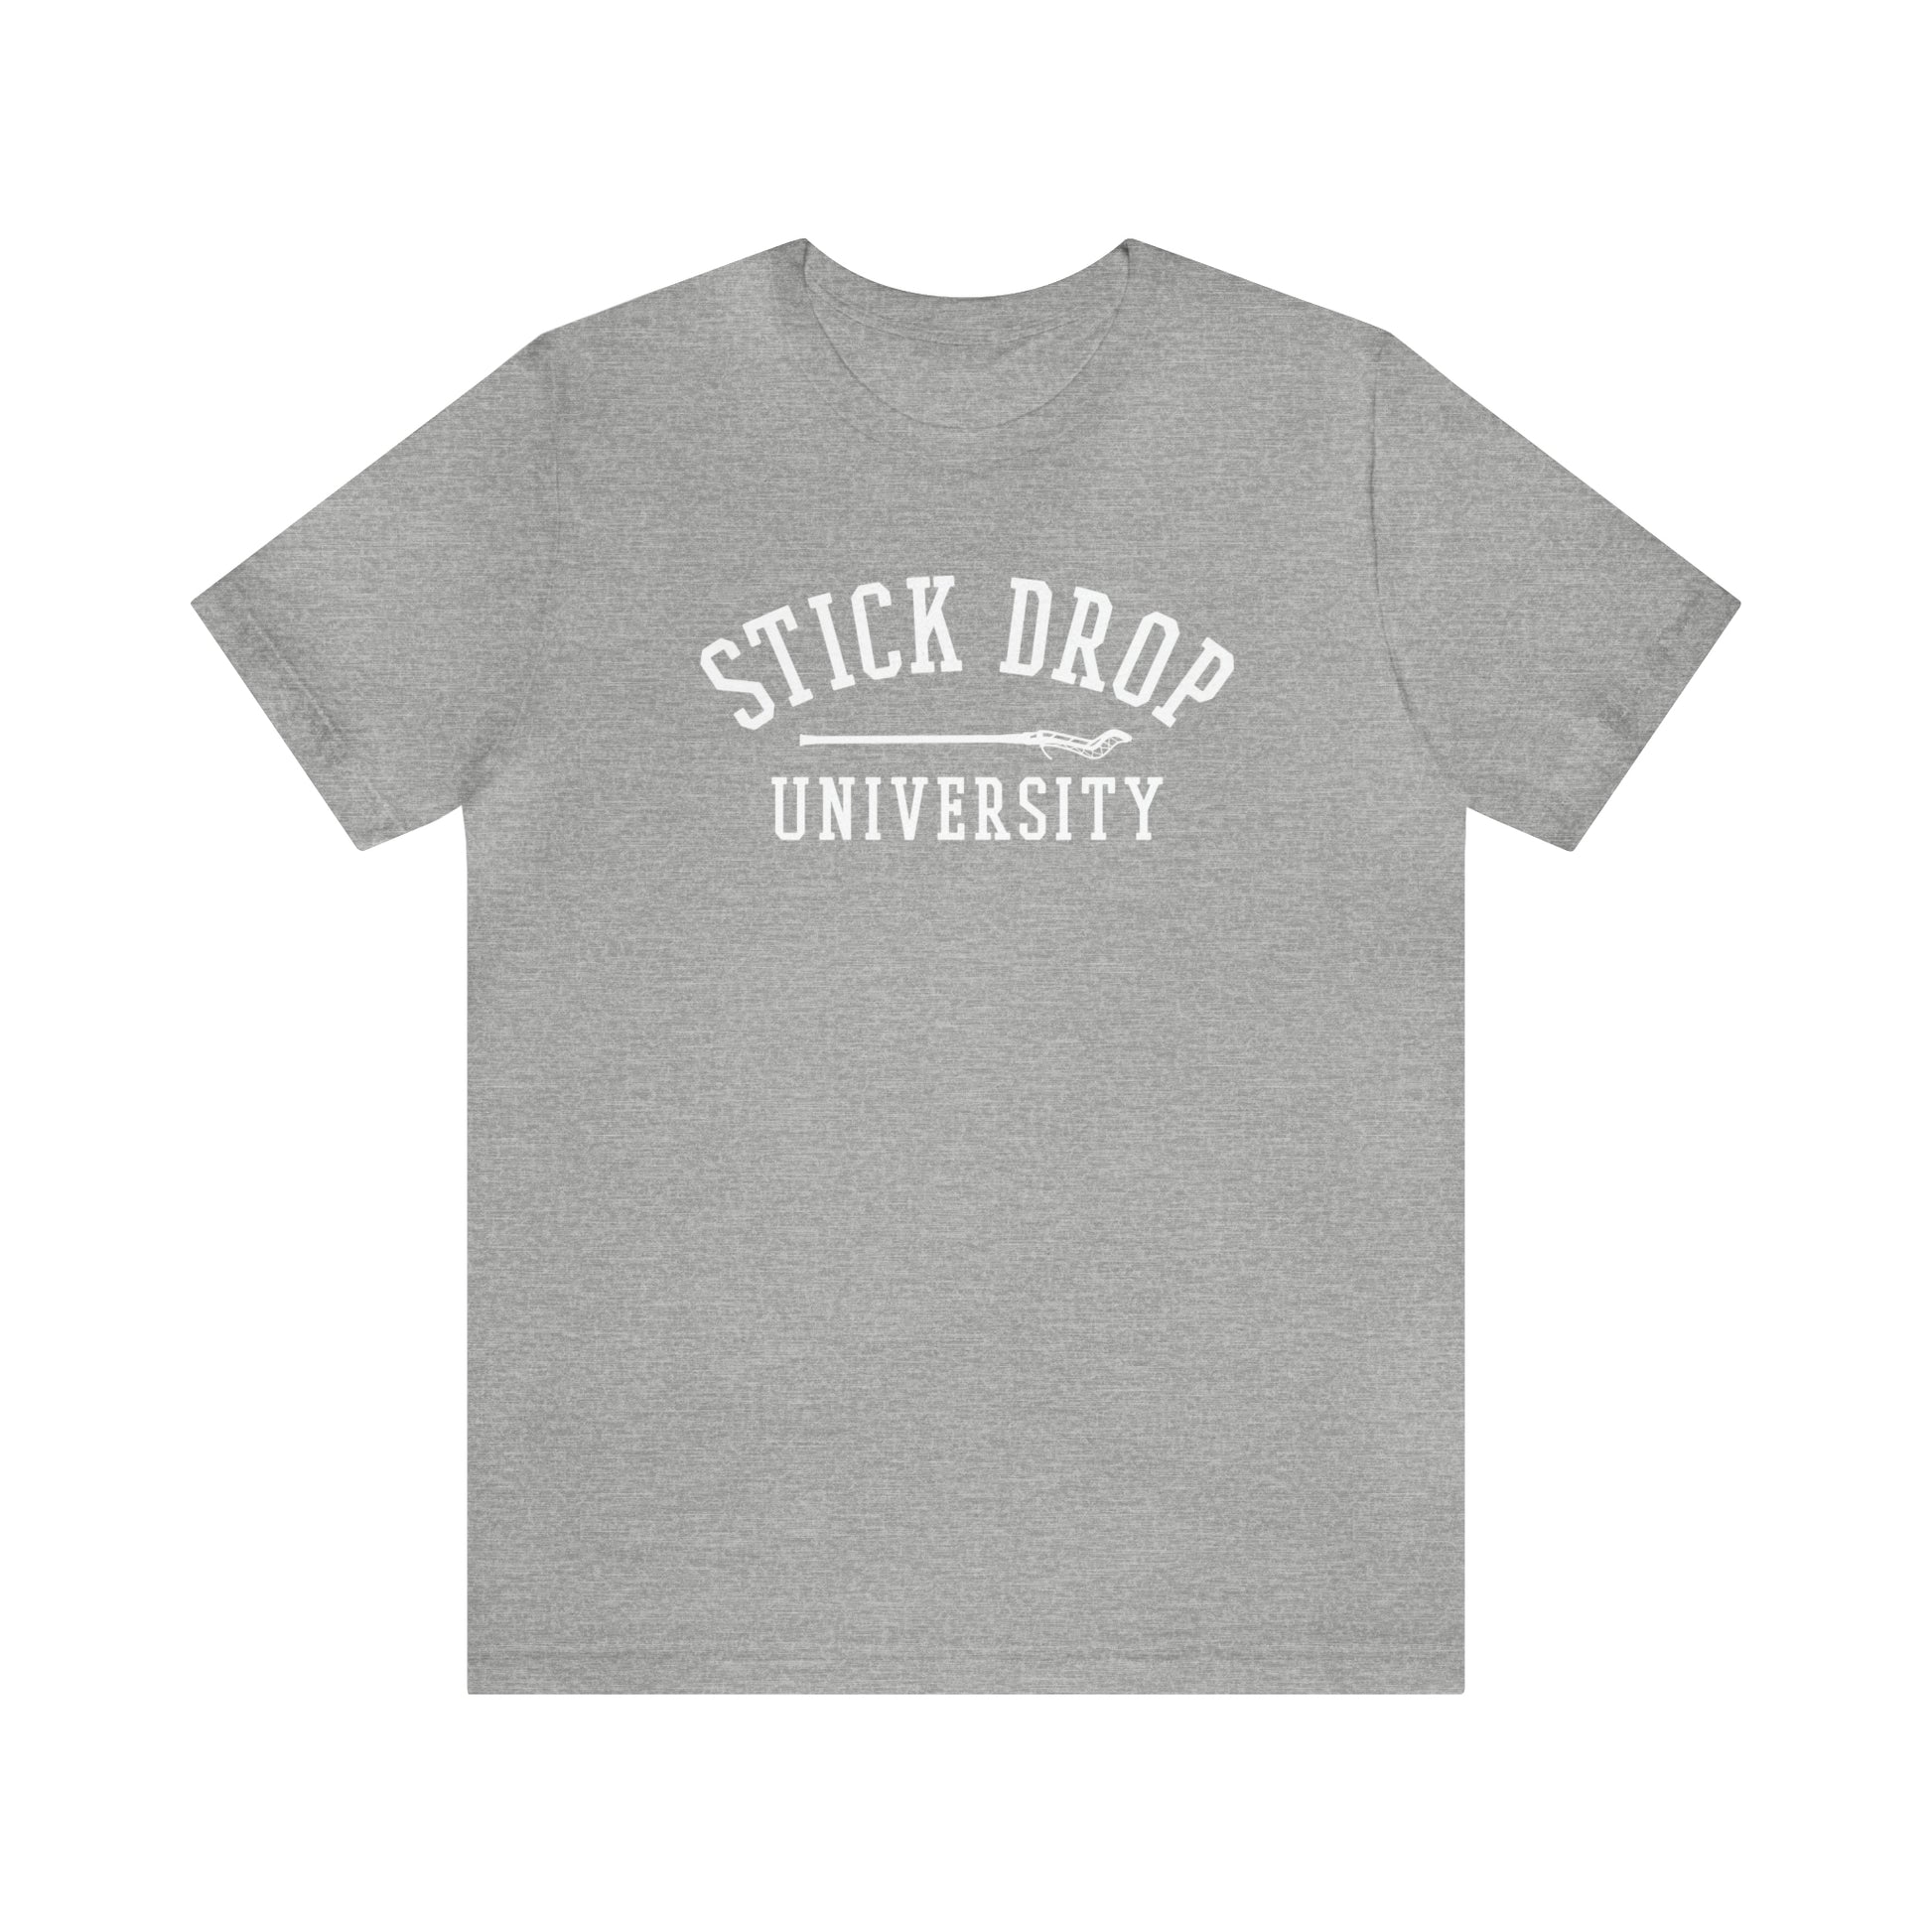 Grey Stick Drop University T-shirt with white lettering